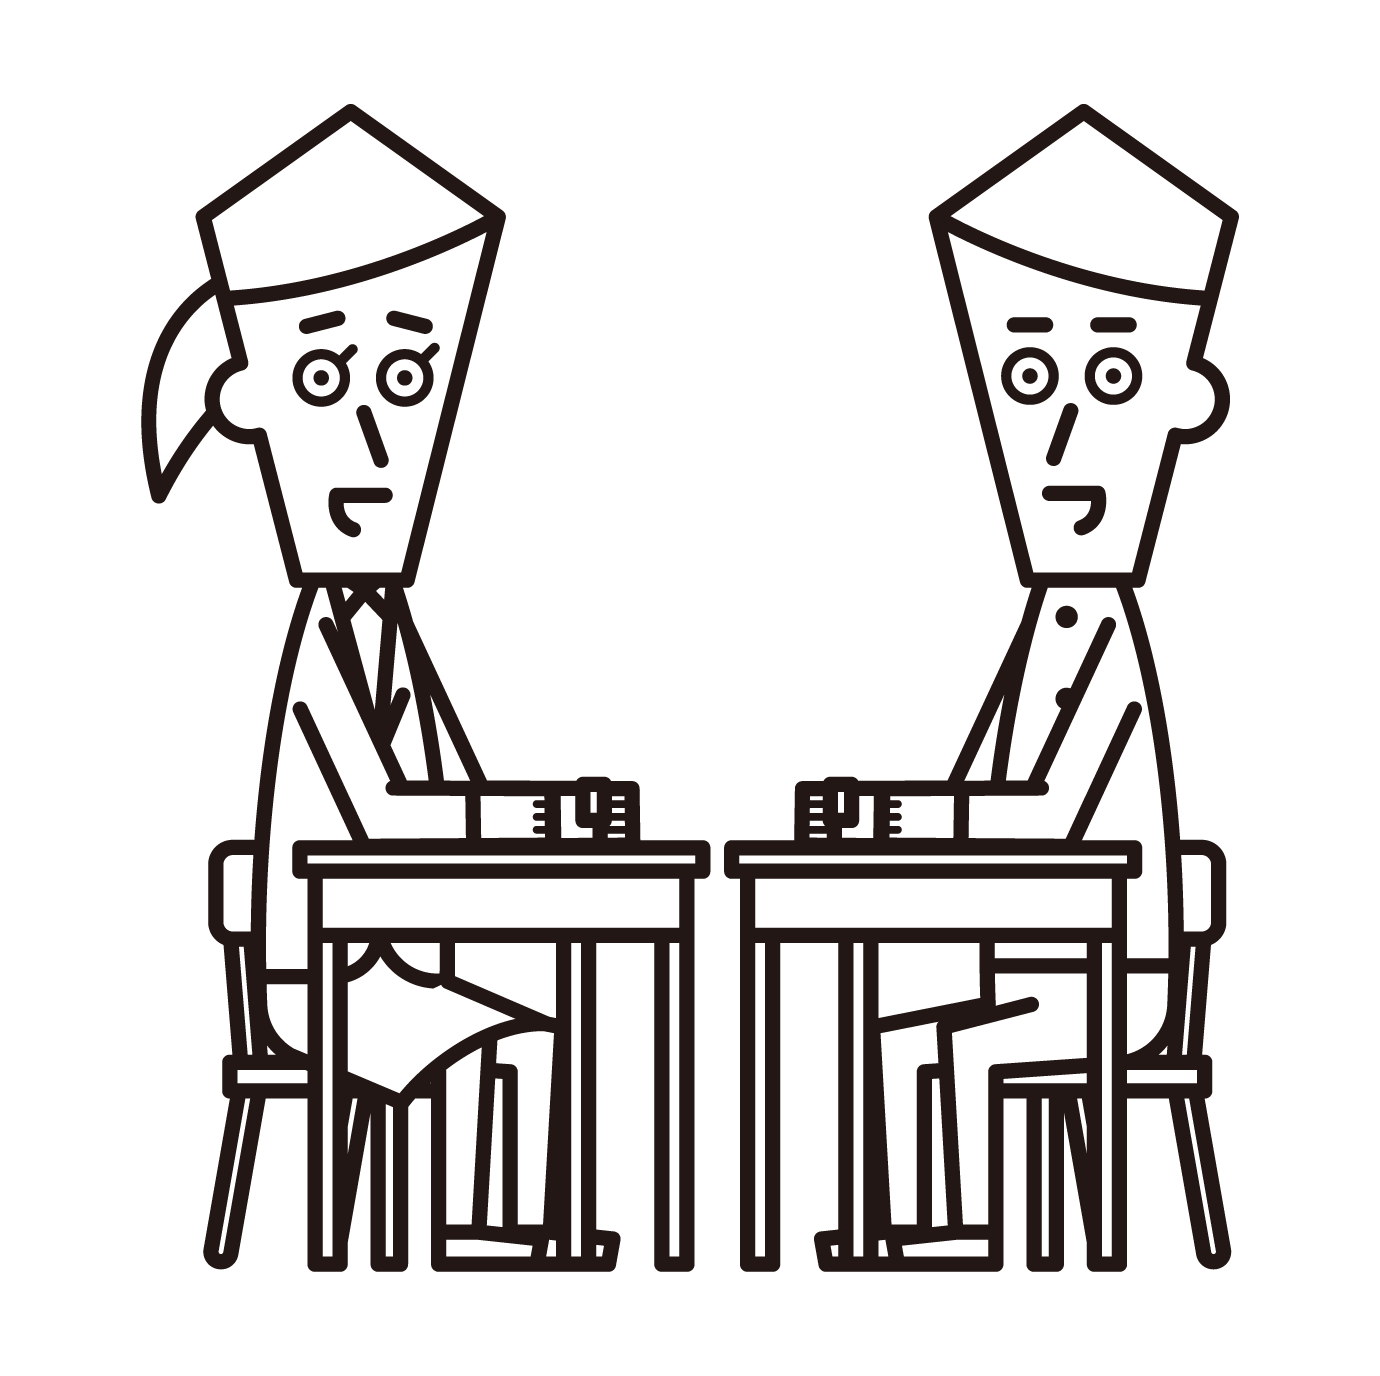 Illustration of a male high school student and a male junior high school student interviewing a teacher